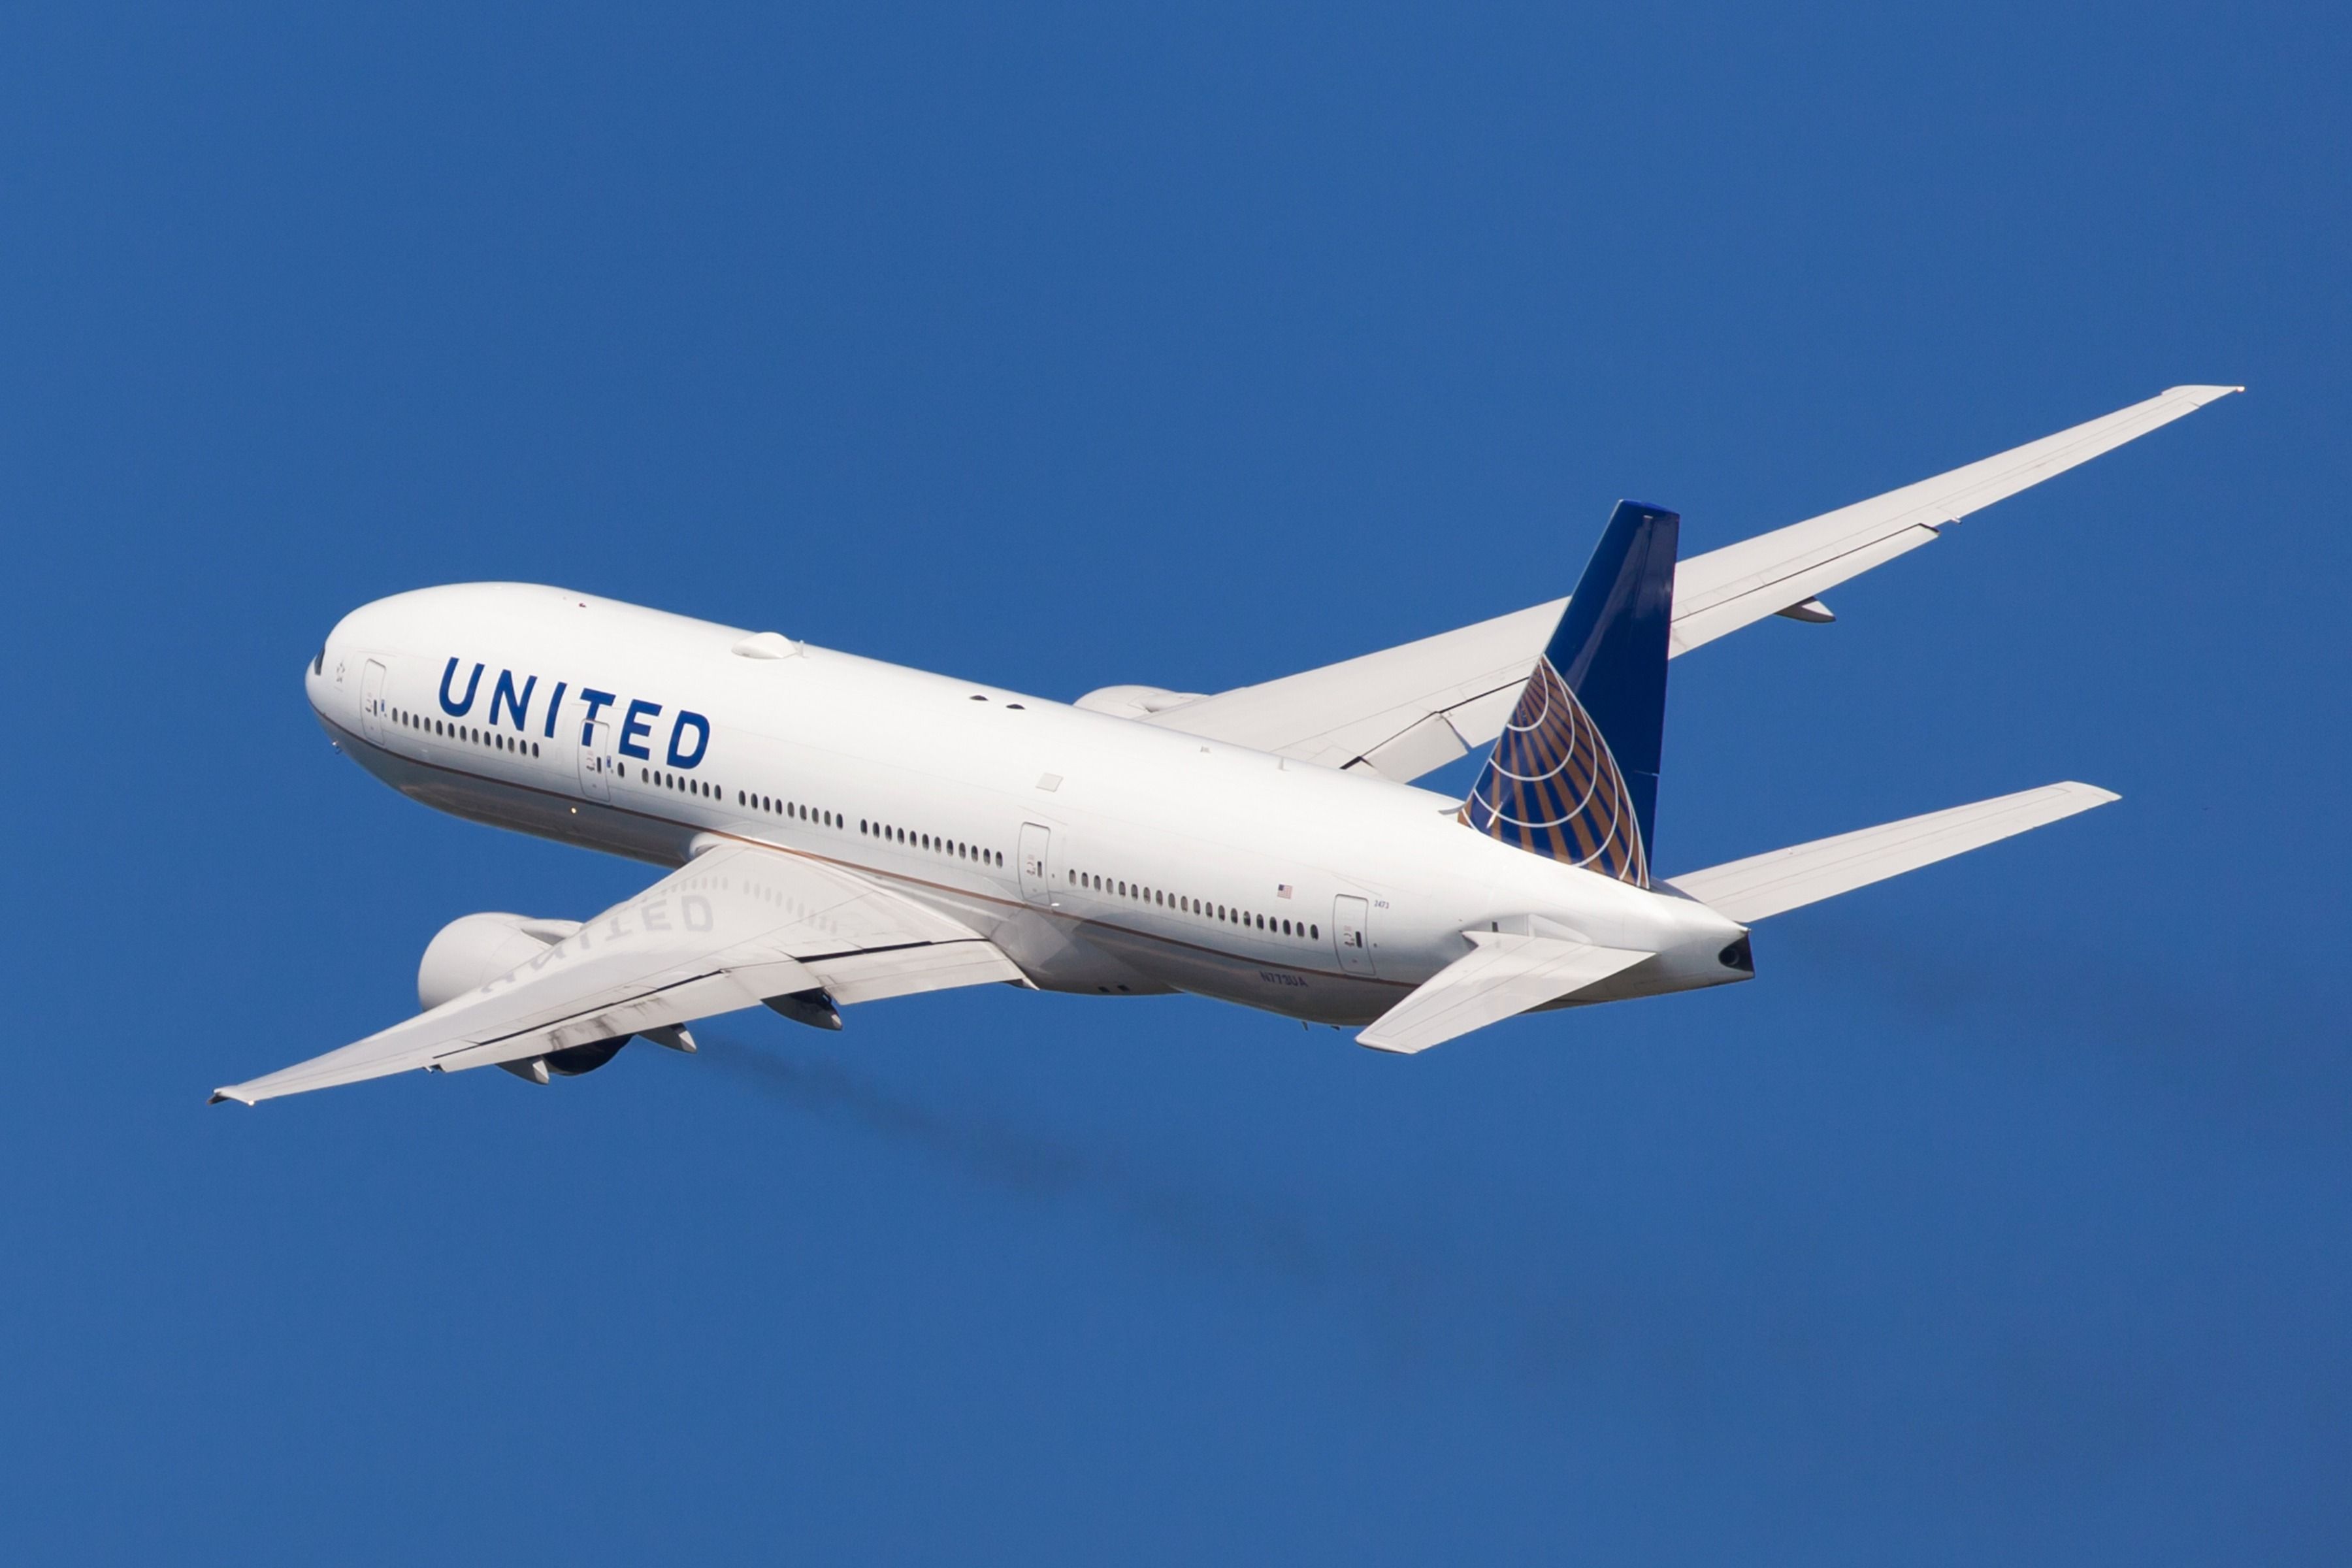 A United Airlines Boeing 777 flying in the sky.